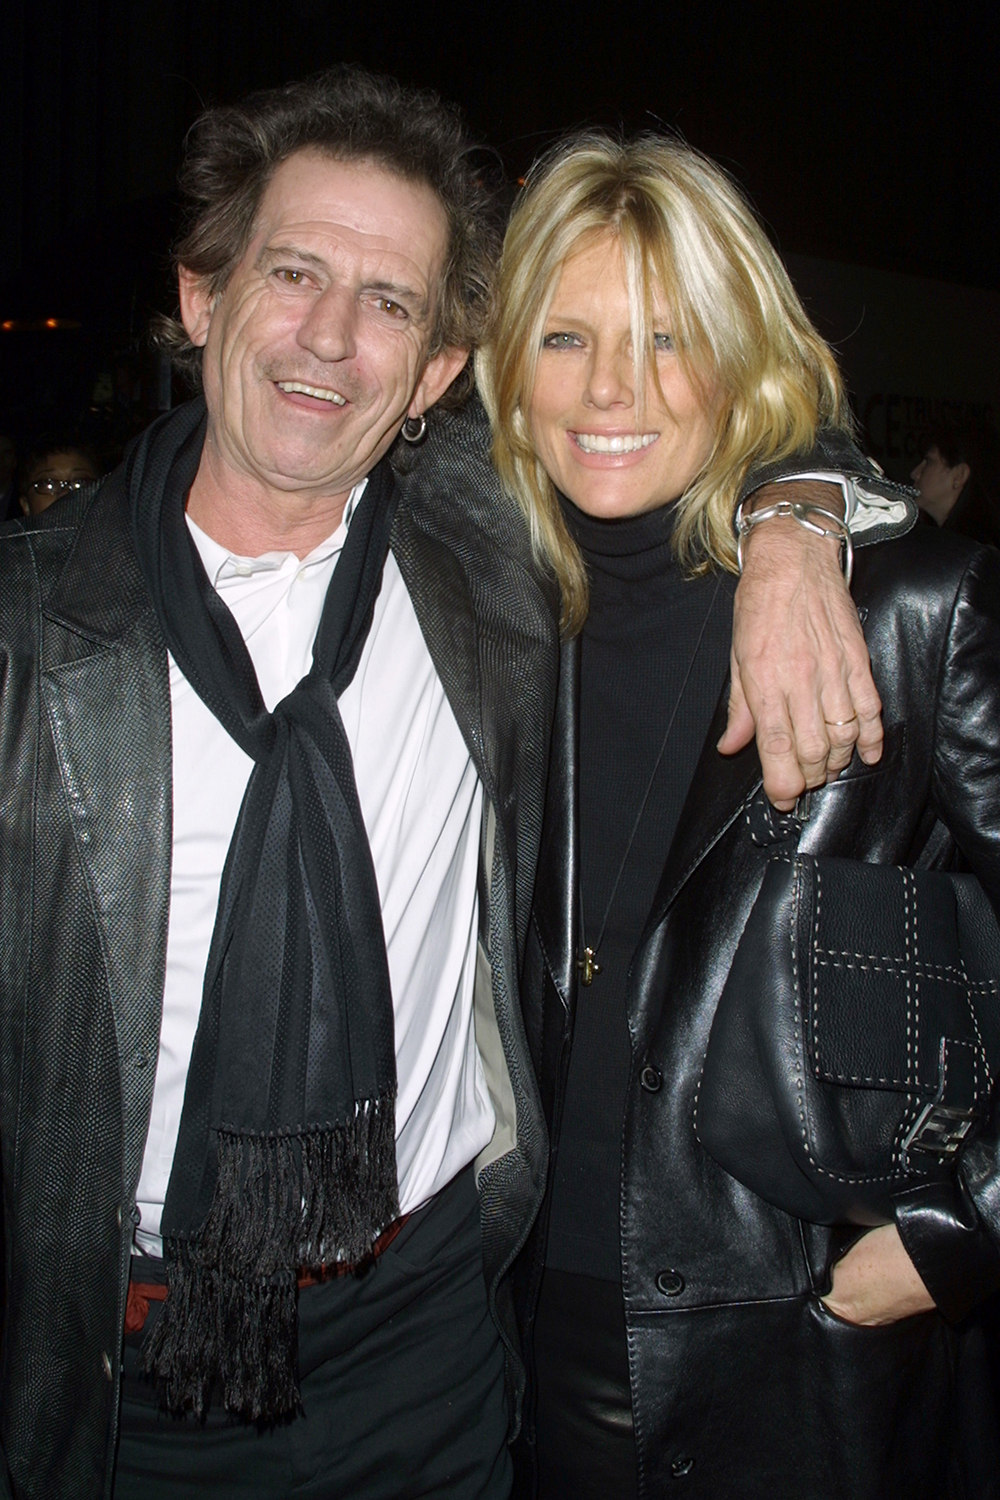 Patti Hansen married Rolling Stone Keith Richards in 1983. The couple have two daughters Alexandra and Theodora and live in upstate New York.